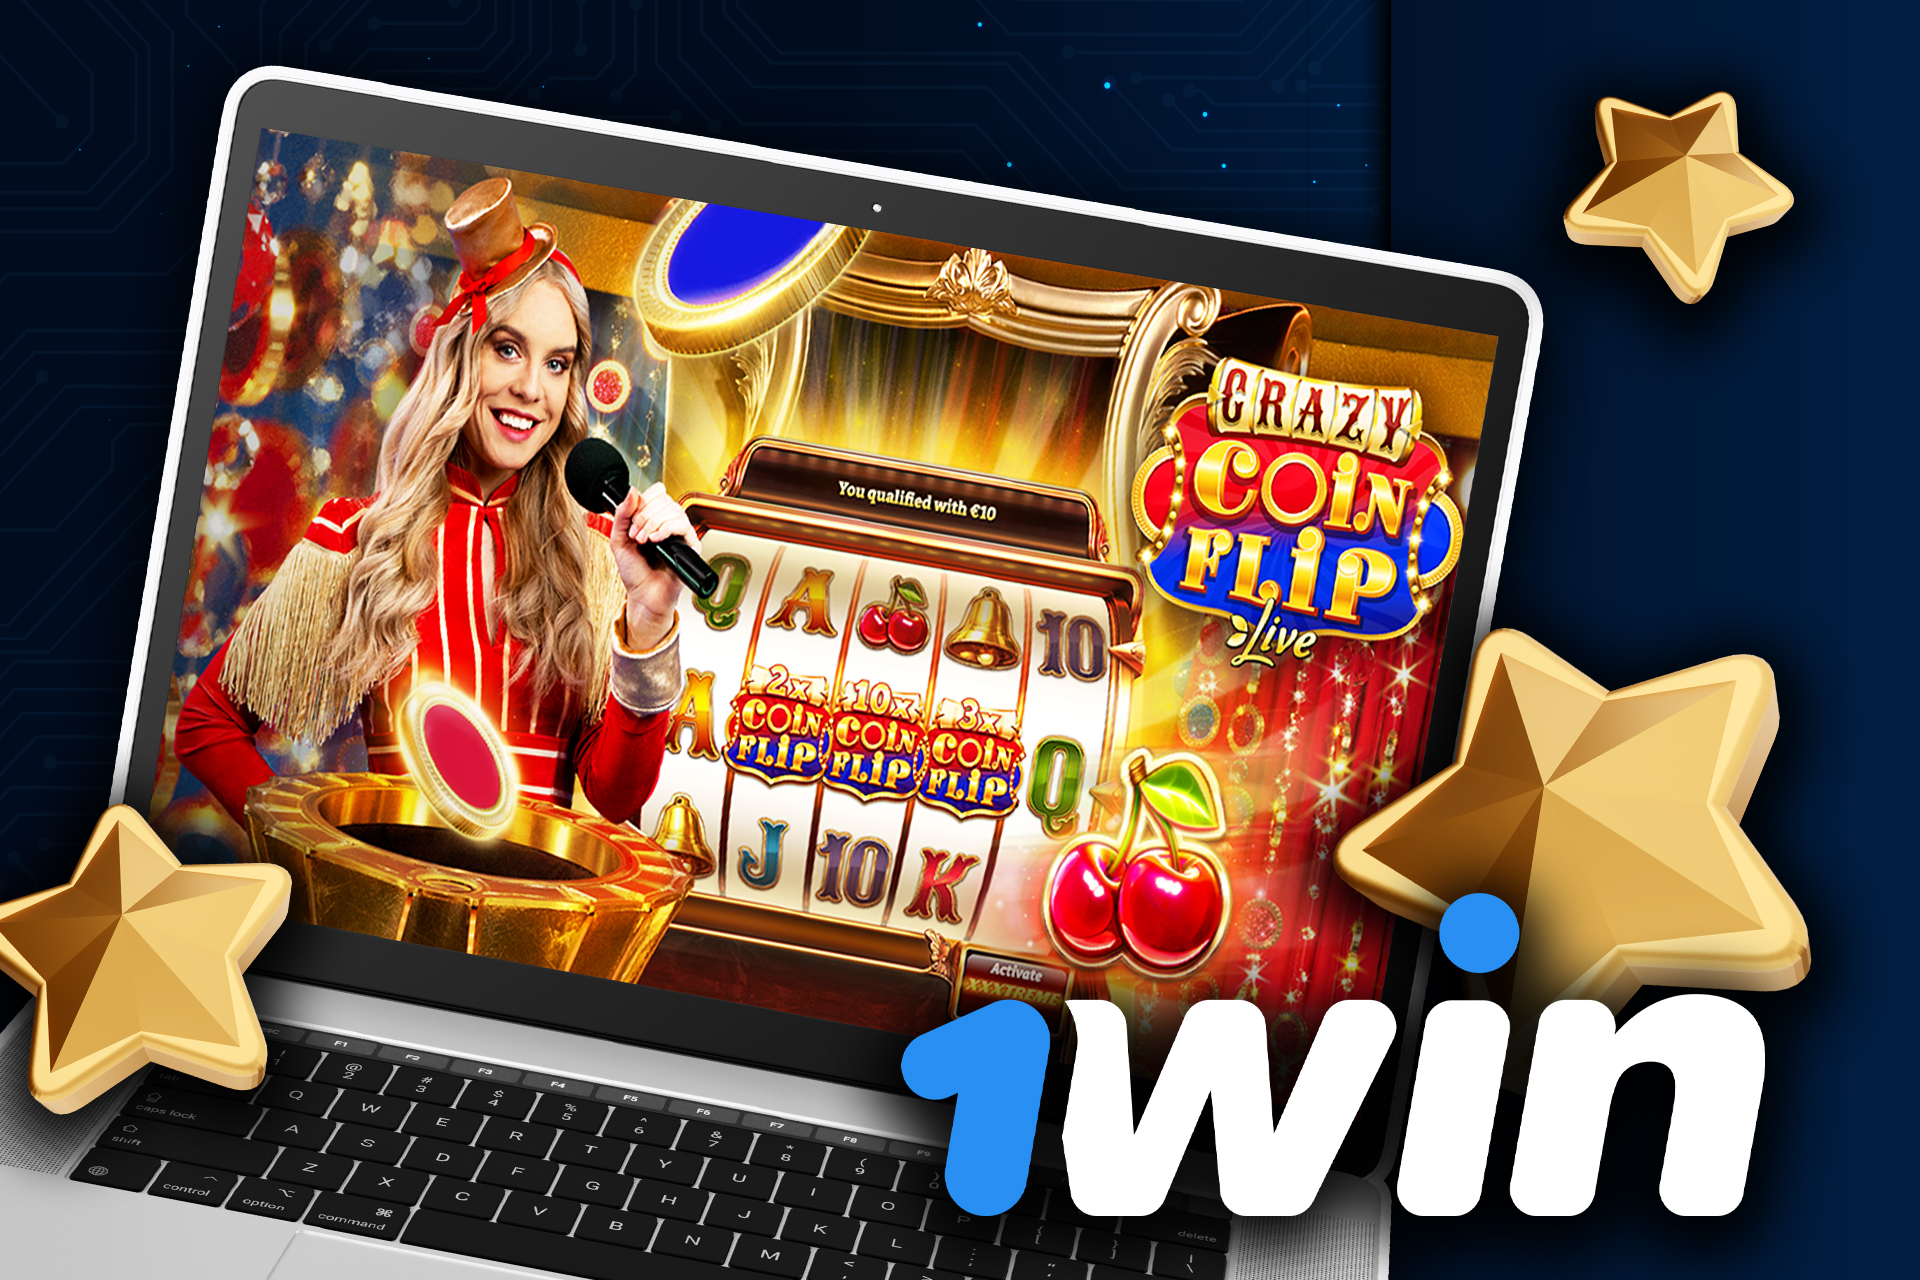 It's an exciting slot game that you can find in the 1win casino.